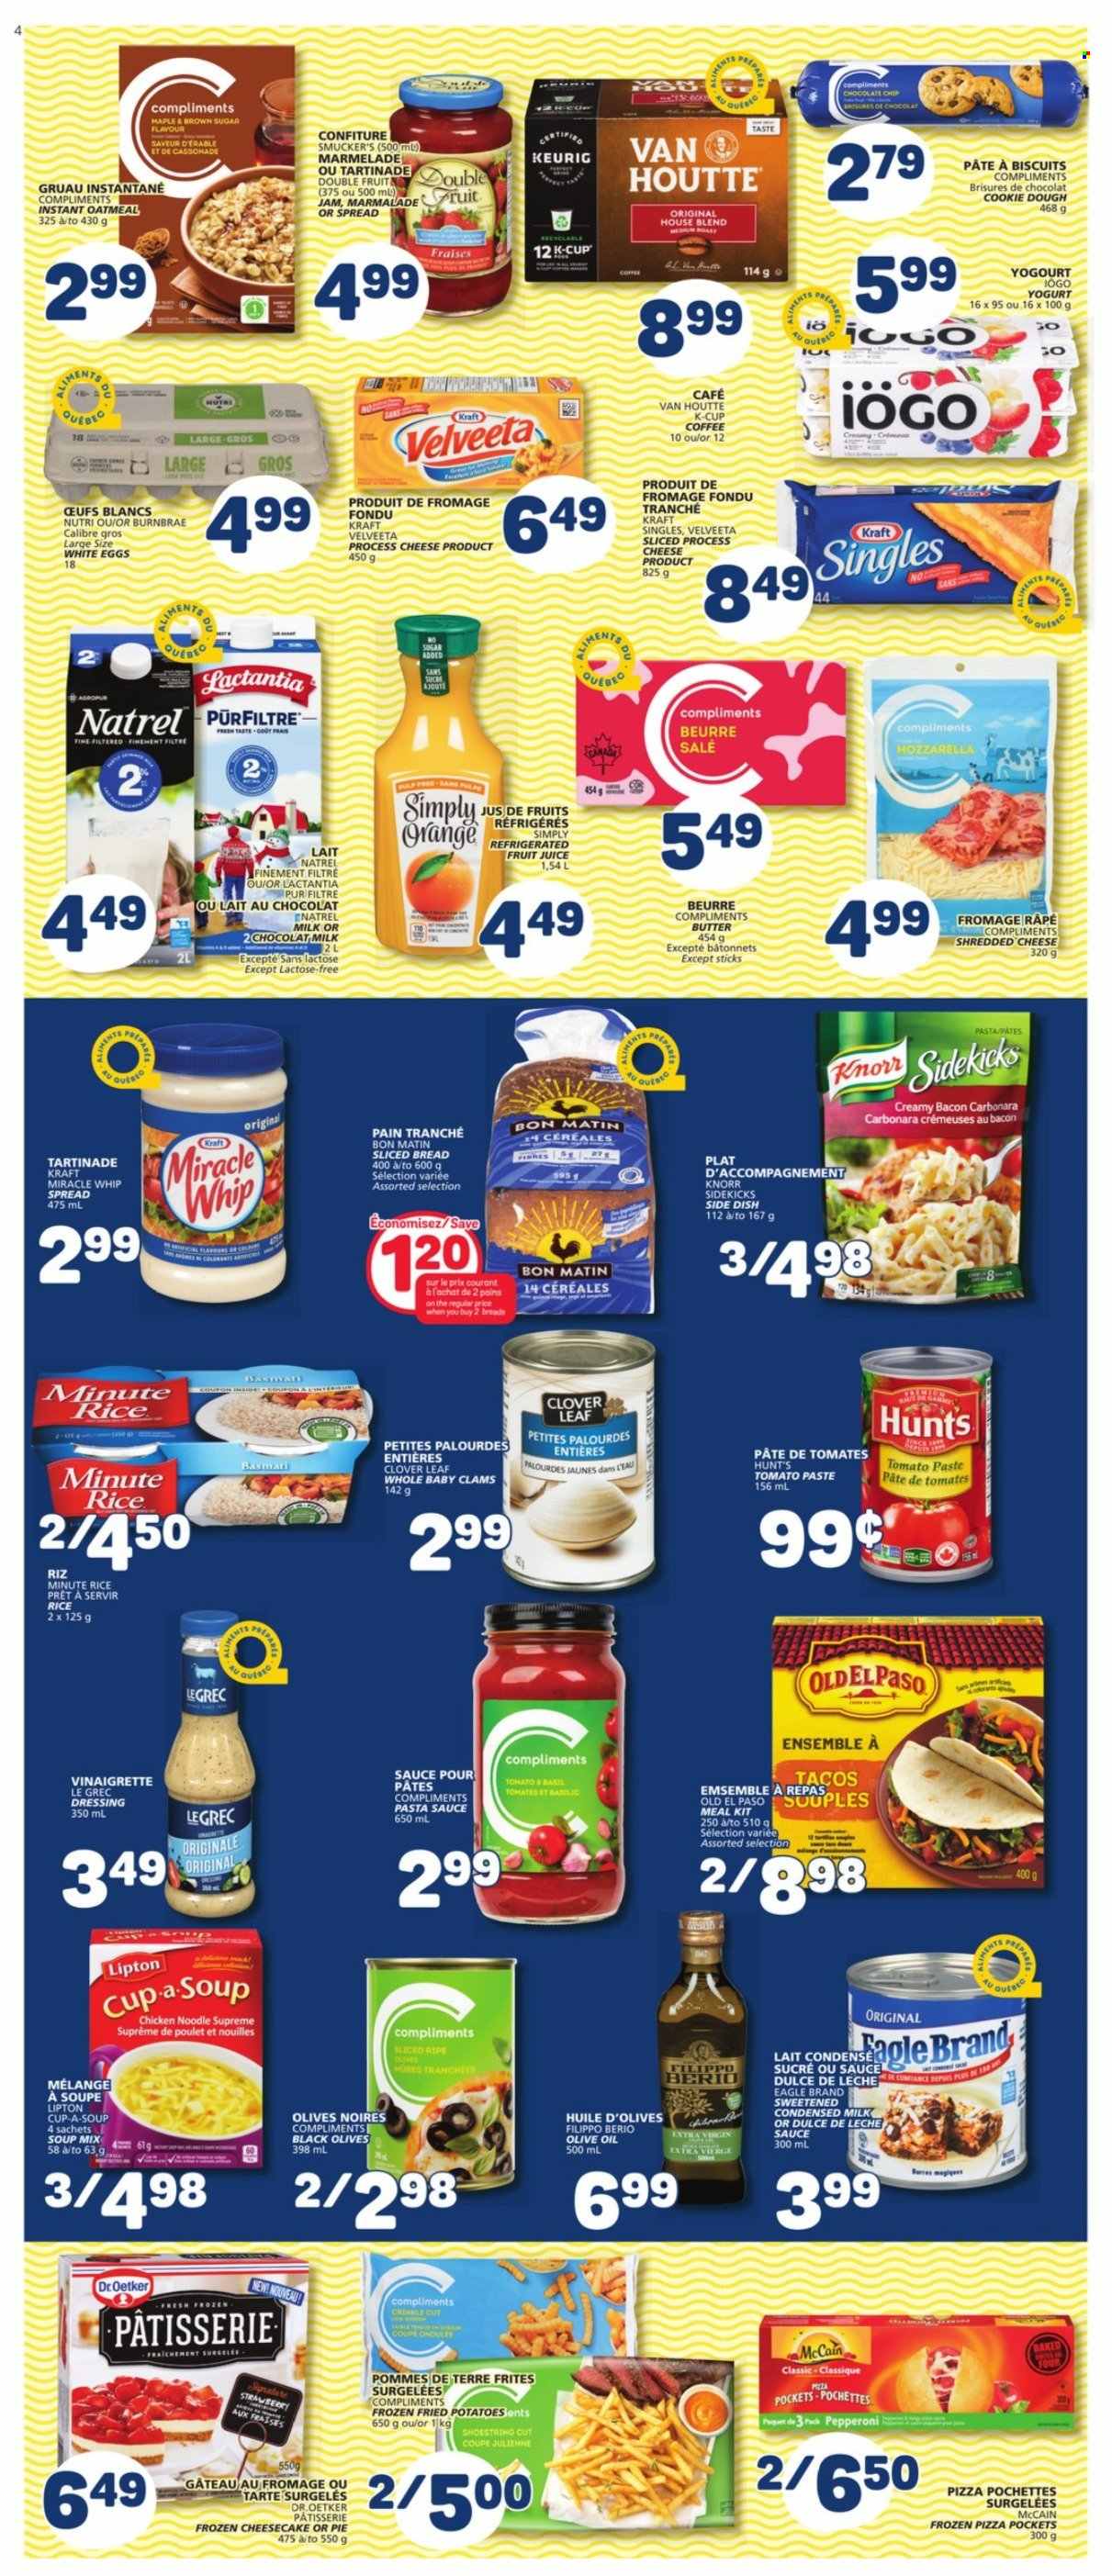 thumbnail - Marché Bonichoix Flyer - December 02, 2021 - December 08, 2021 - Sales products - bread, pie, tacos, cheesecake, potatoes, clams, pizza, pasta sauce, soup mix, soup, sauce, noodles, Kraft®, bacon, pepperoni, sandwich slices, shredded cheese, Dr. Oetker, Kraft Singles, yoghurt, Clover, milk, condensed milk, eggs, butter, Miracle Whip, McCain, cookie dough, biscuit, oatmeal, tomato paste, rice, vinaigrette dressing, dressing, olive oil, oil, fruit jam, juice, fruit juice, coffee, coffee capsules, K-Cups, Keurig, Knorr, olives, Lipton. Page 4.